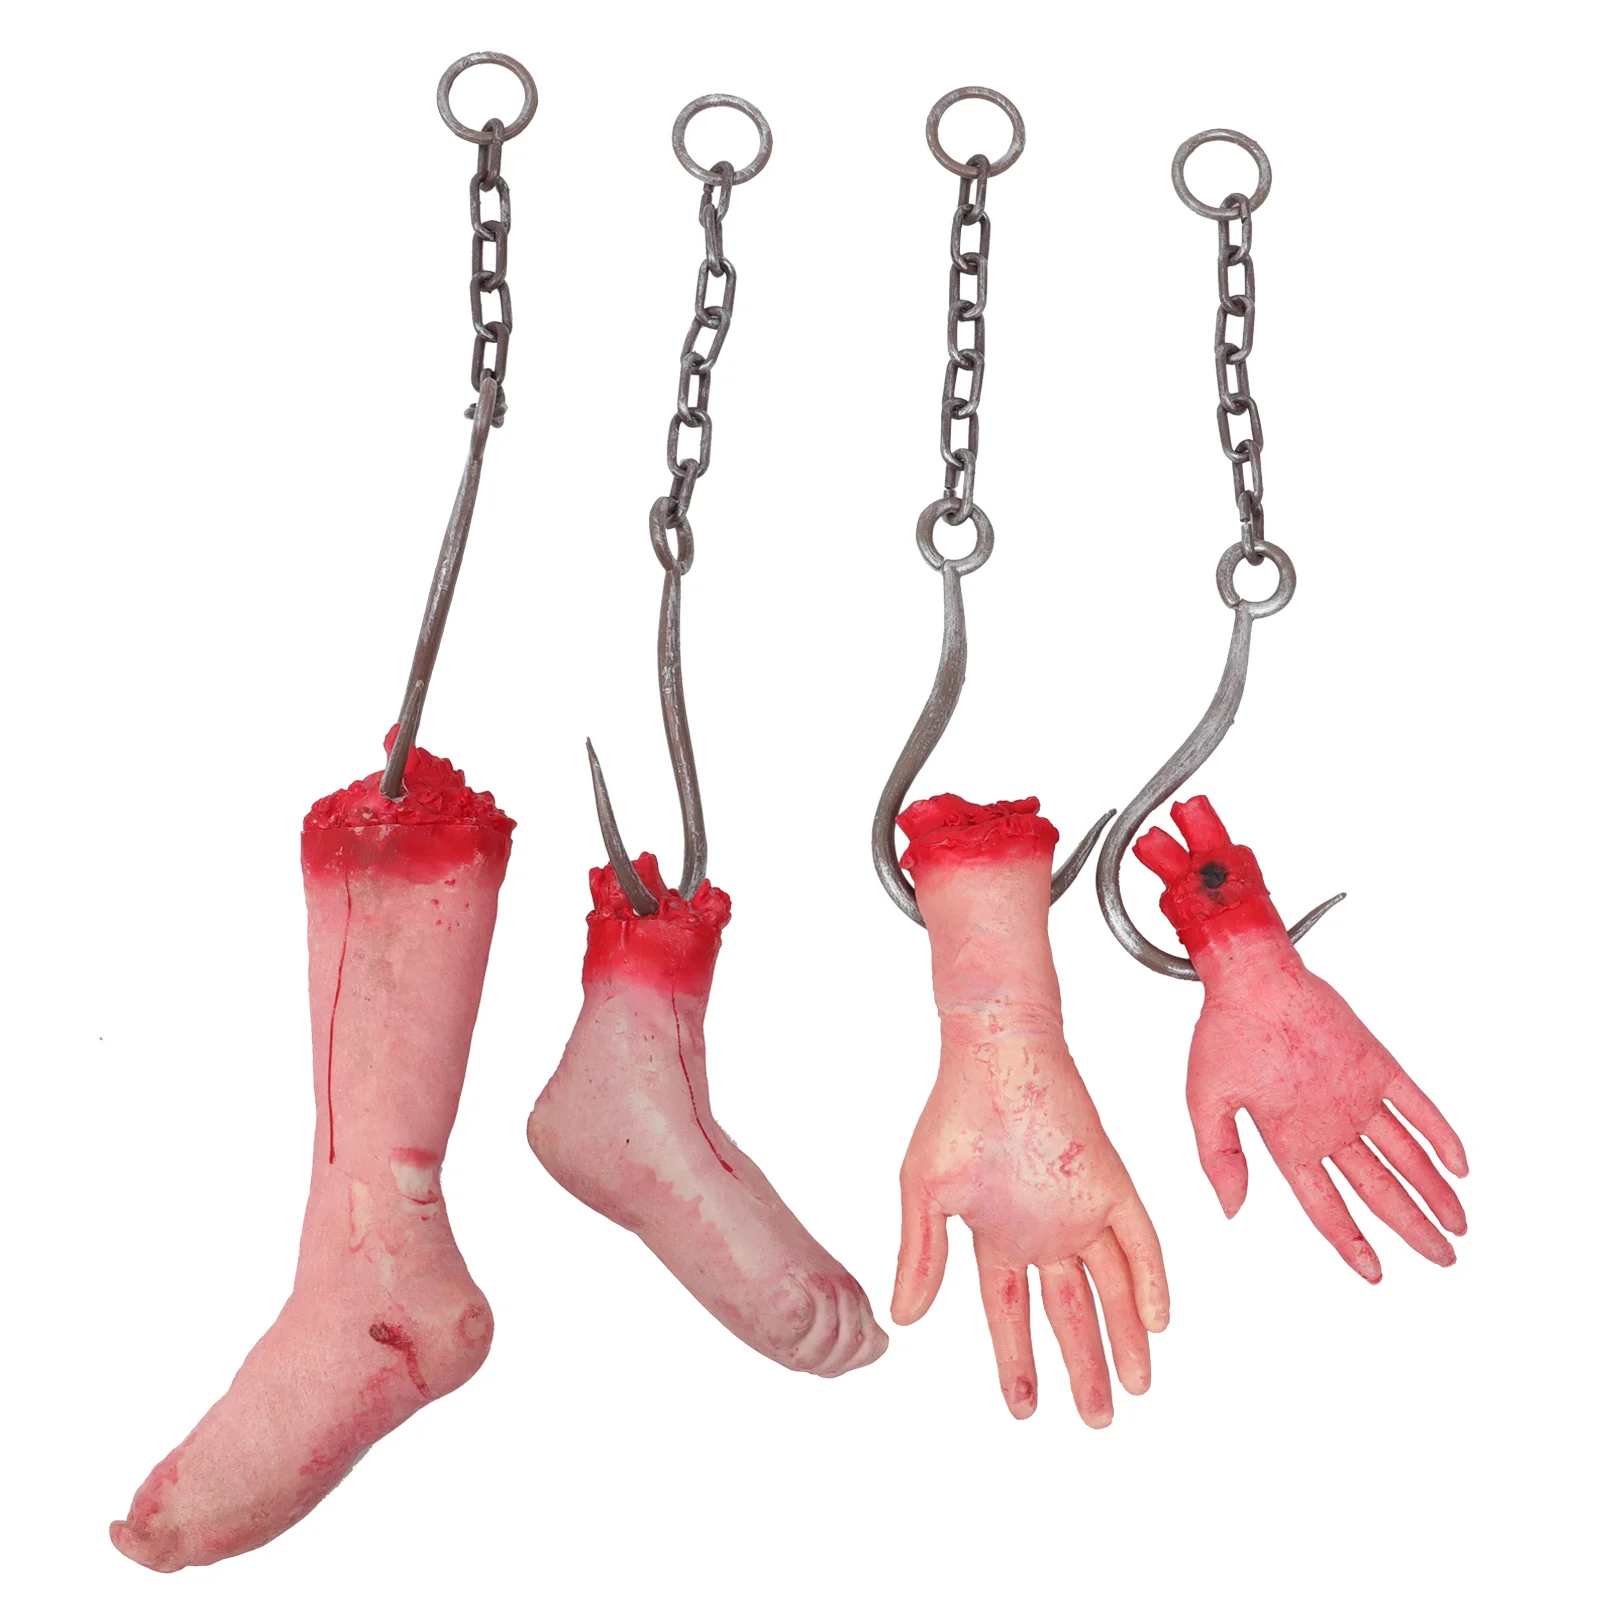 

Scary Props Broken Body Parts Halloween Haunted House Prank Decoration Tricky Festival